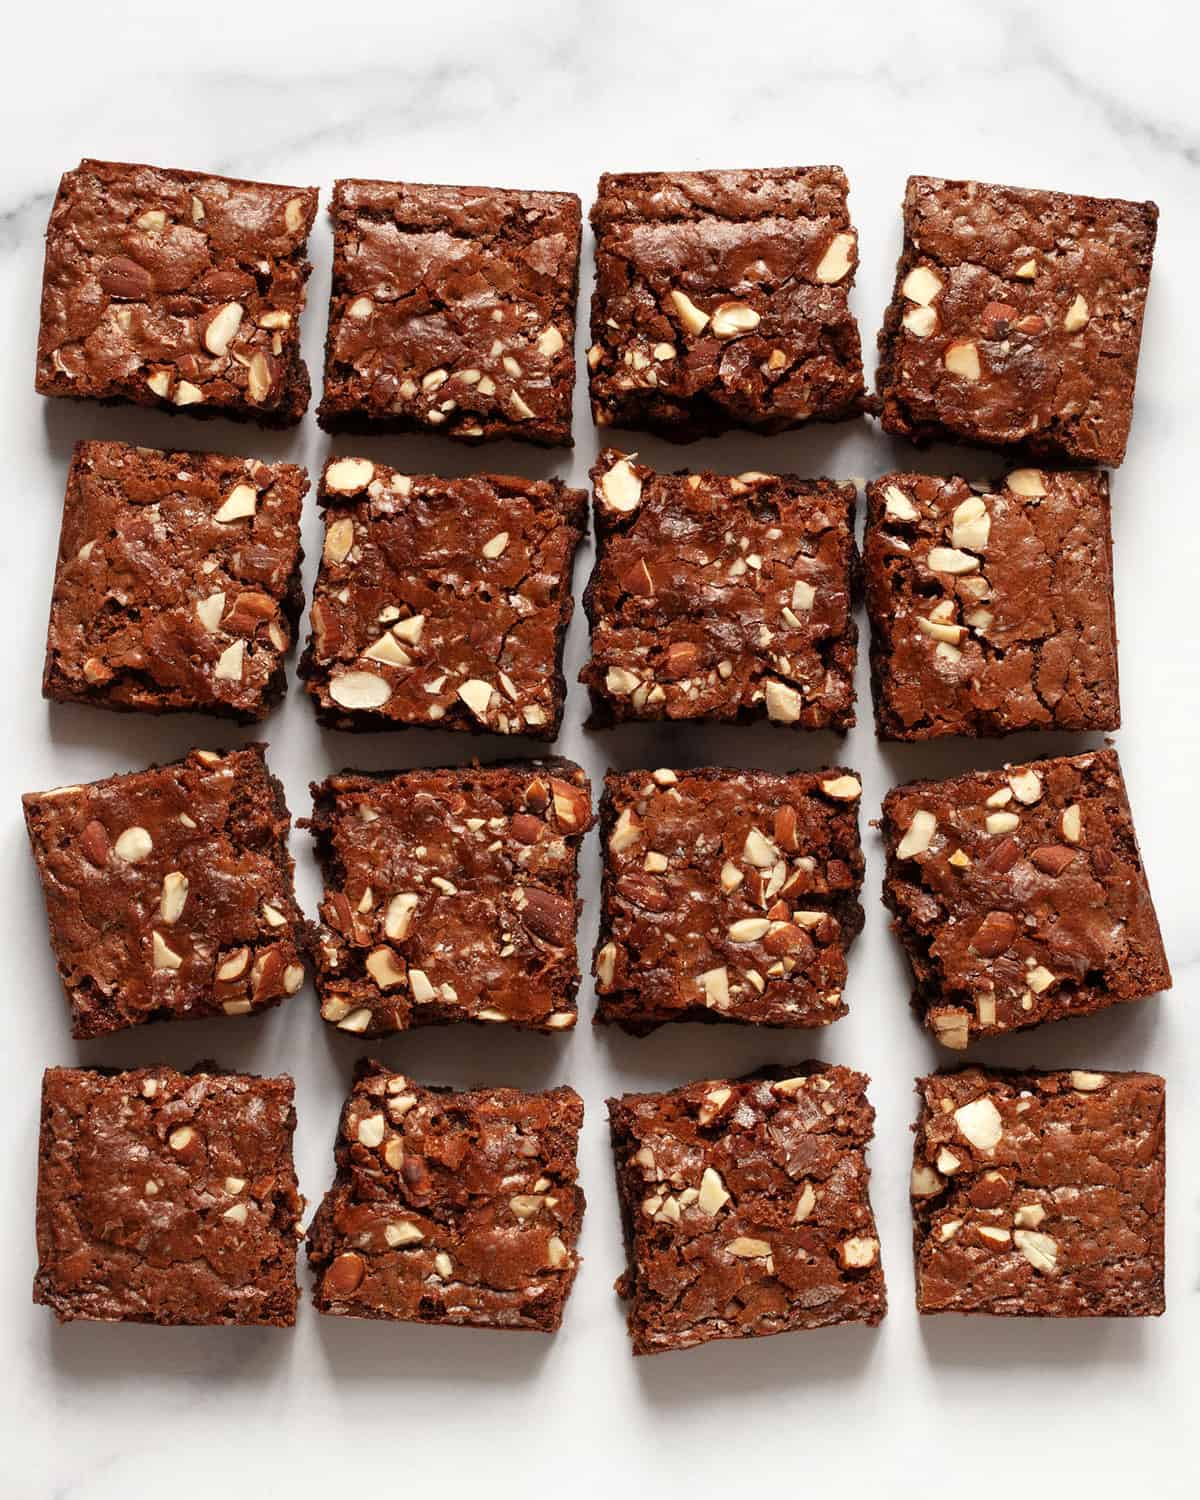 16 brownies cut into squares in 4 rows.